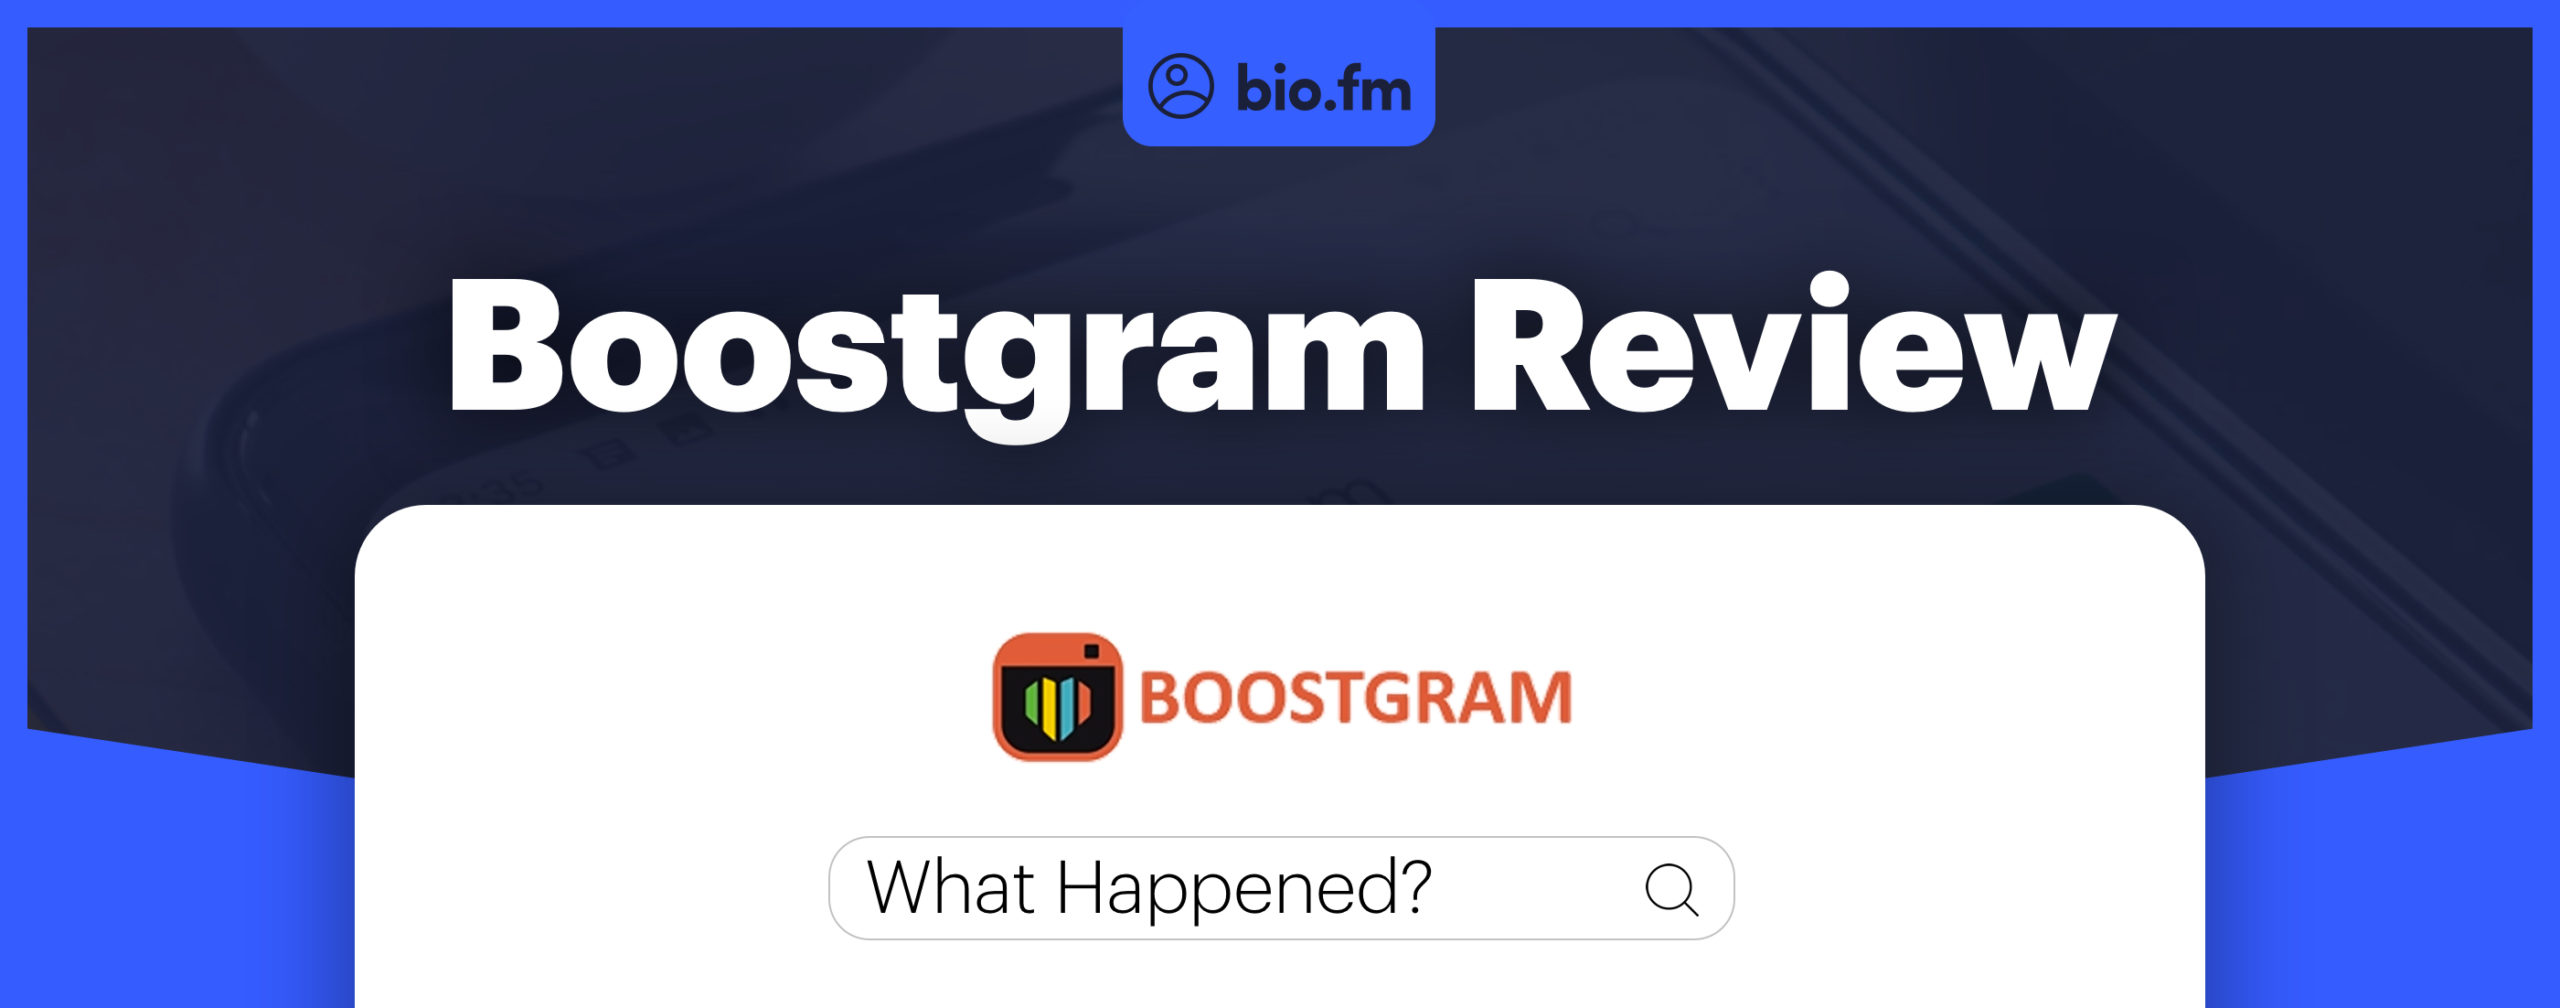 boostgram review featured image